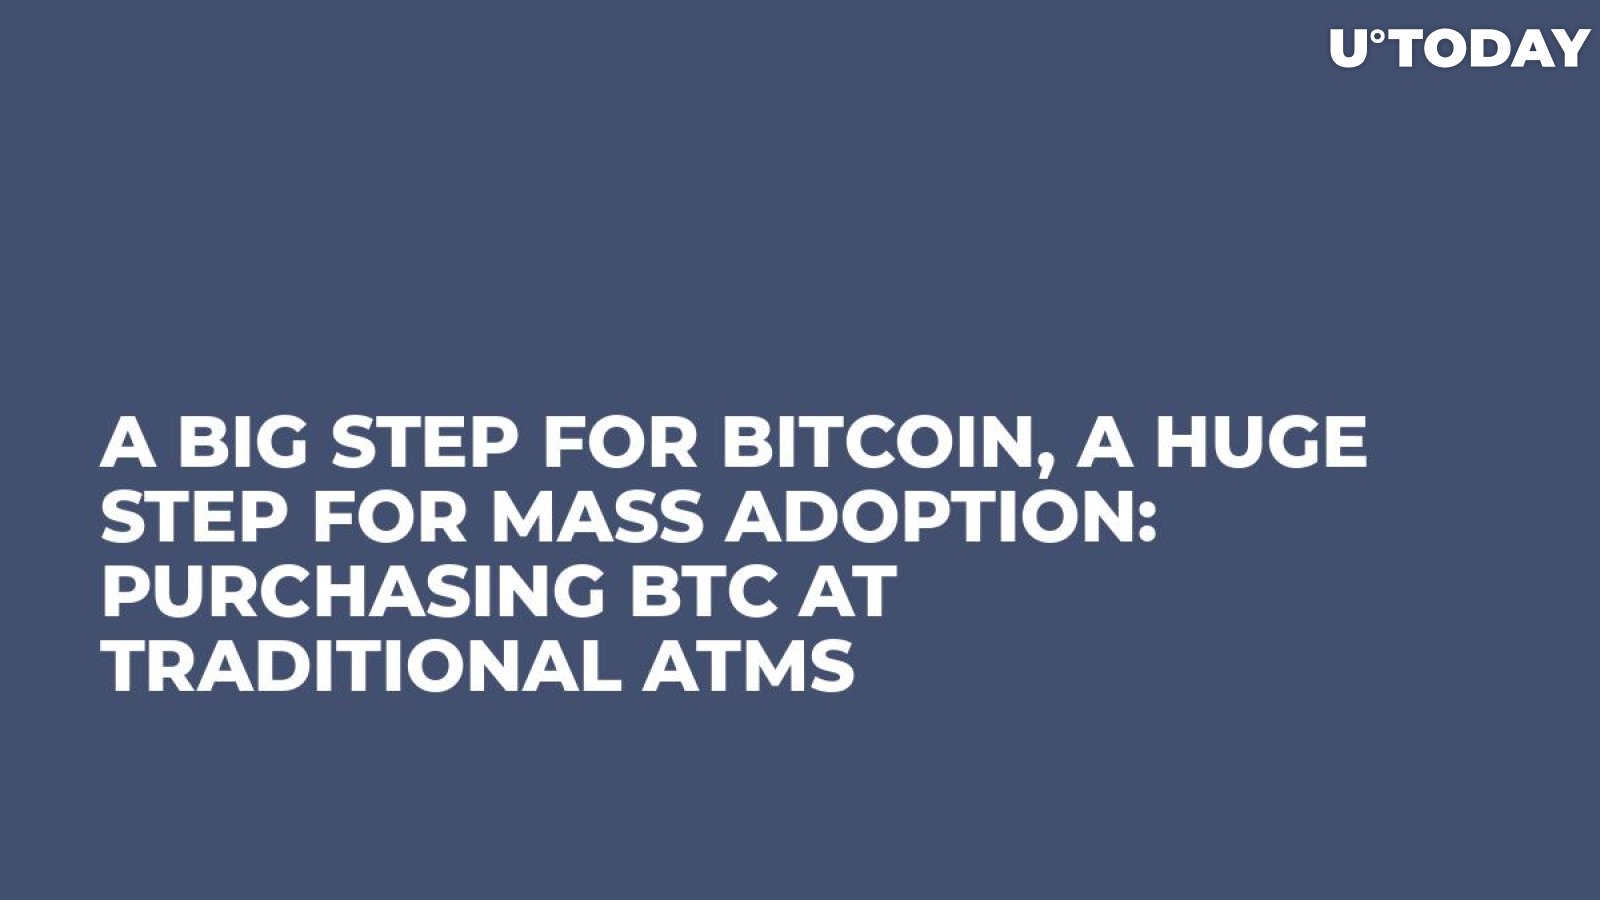 A Big Step for Bitcoin, a Huge Step for Mass Adoption: Purchasing BTC at Traditional ATMs